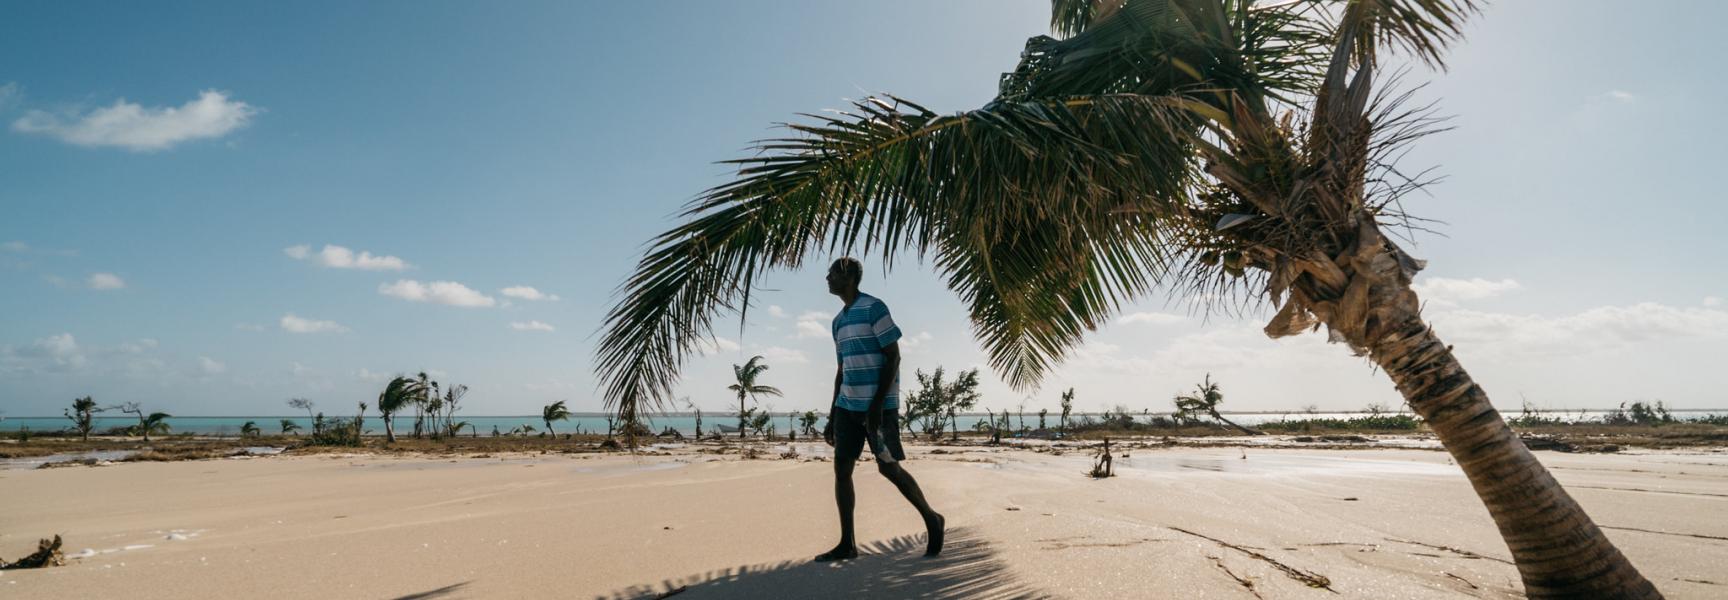 Person walking by a palm tree in a beach in Antigua and Barbuda